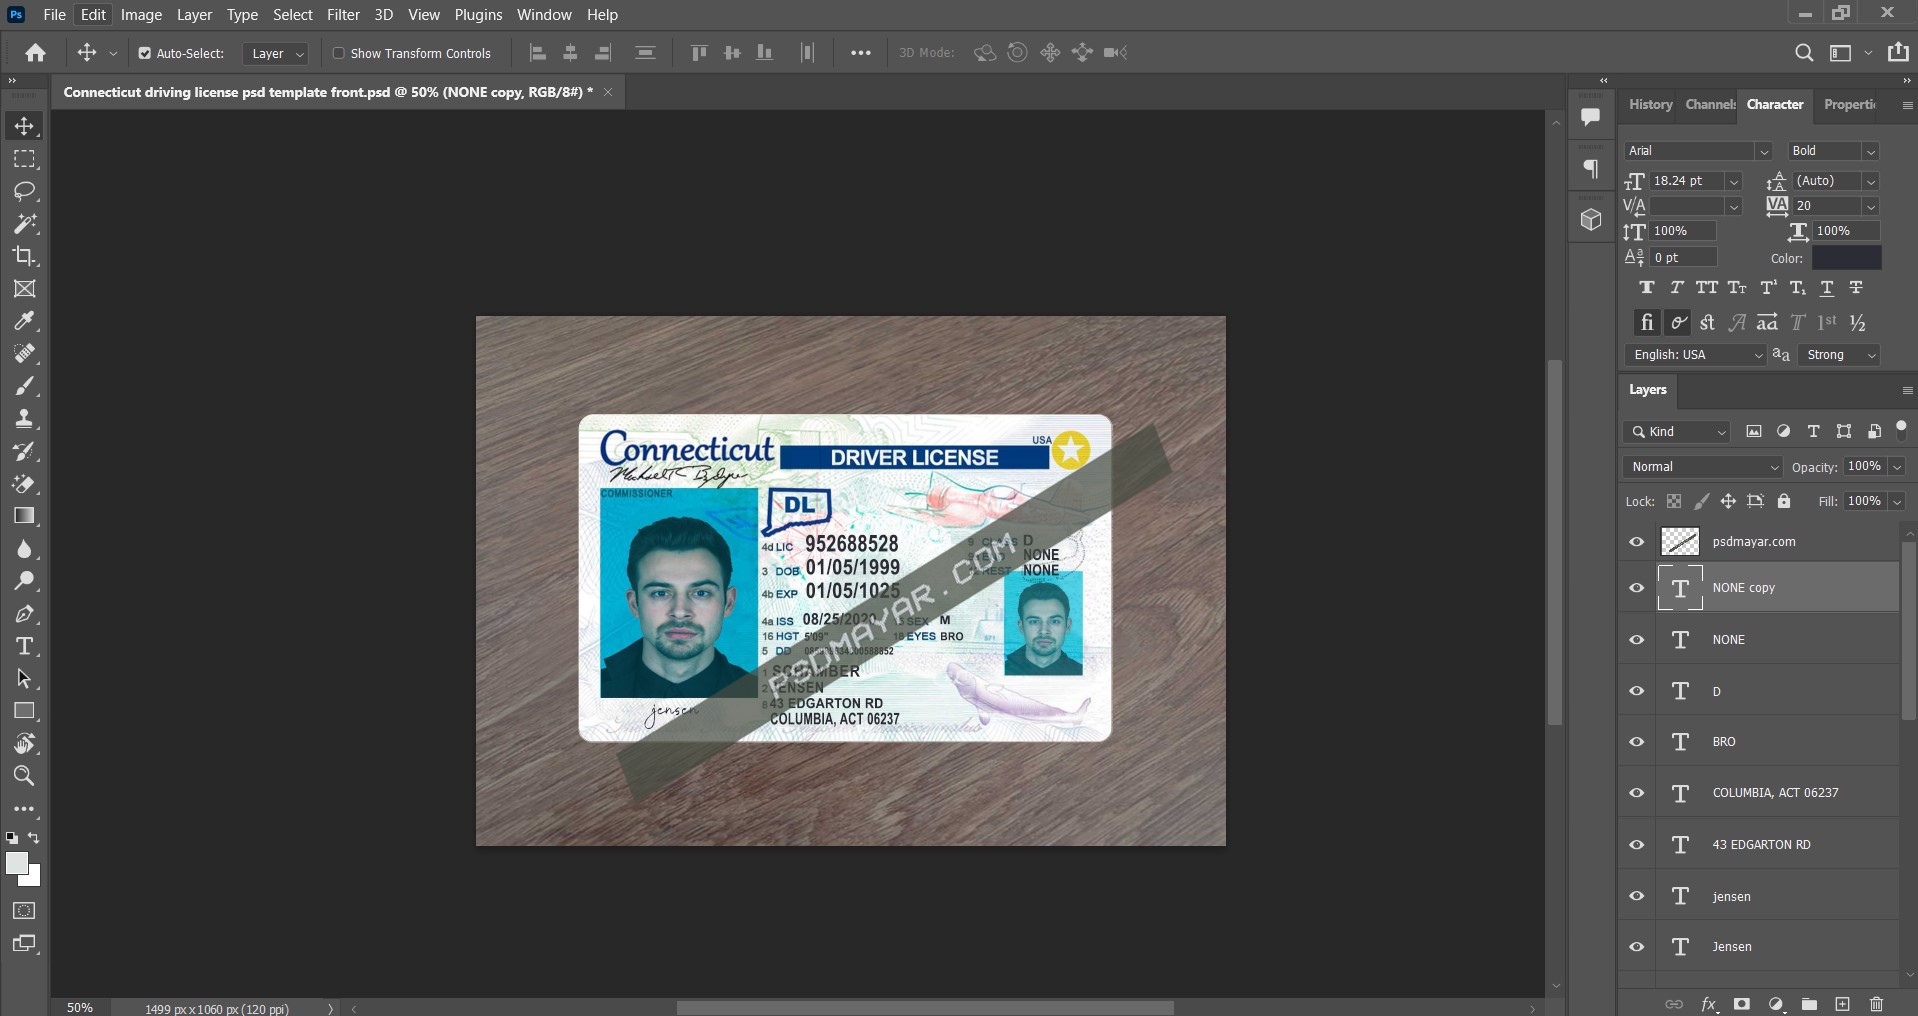 Connecticut driving license psd template